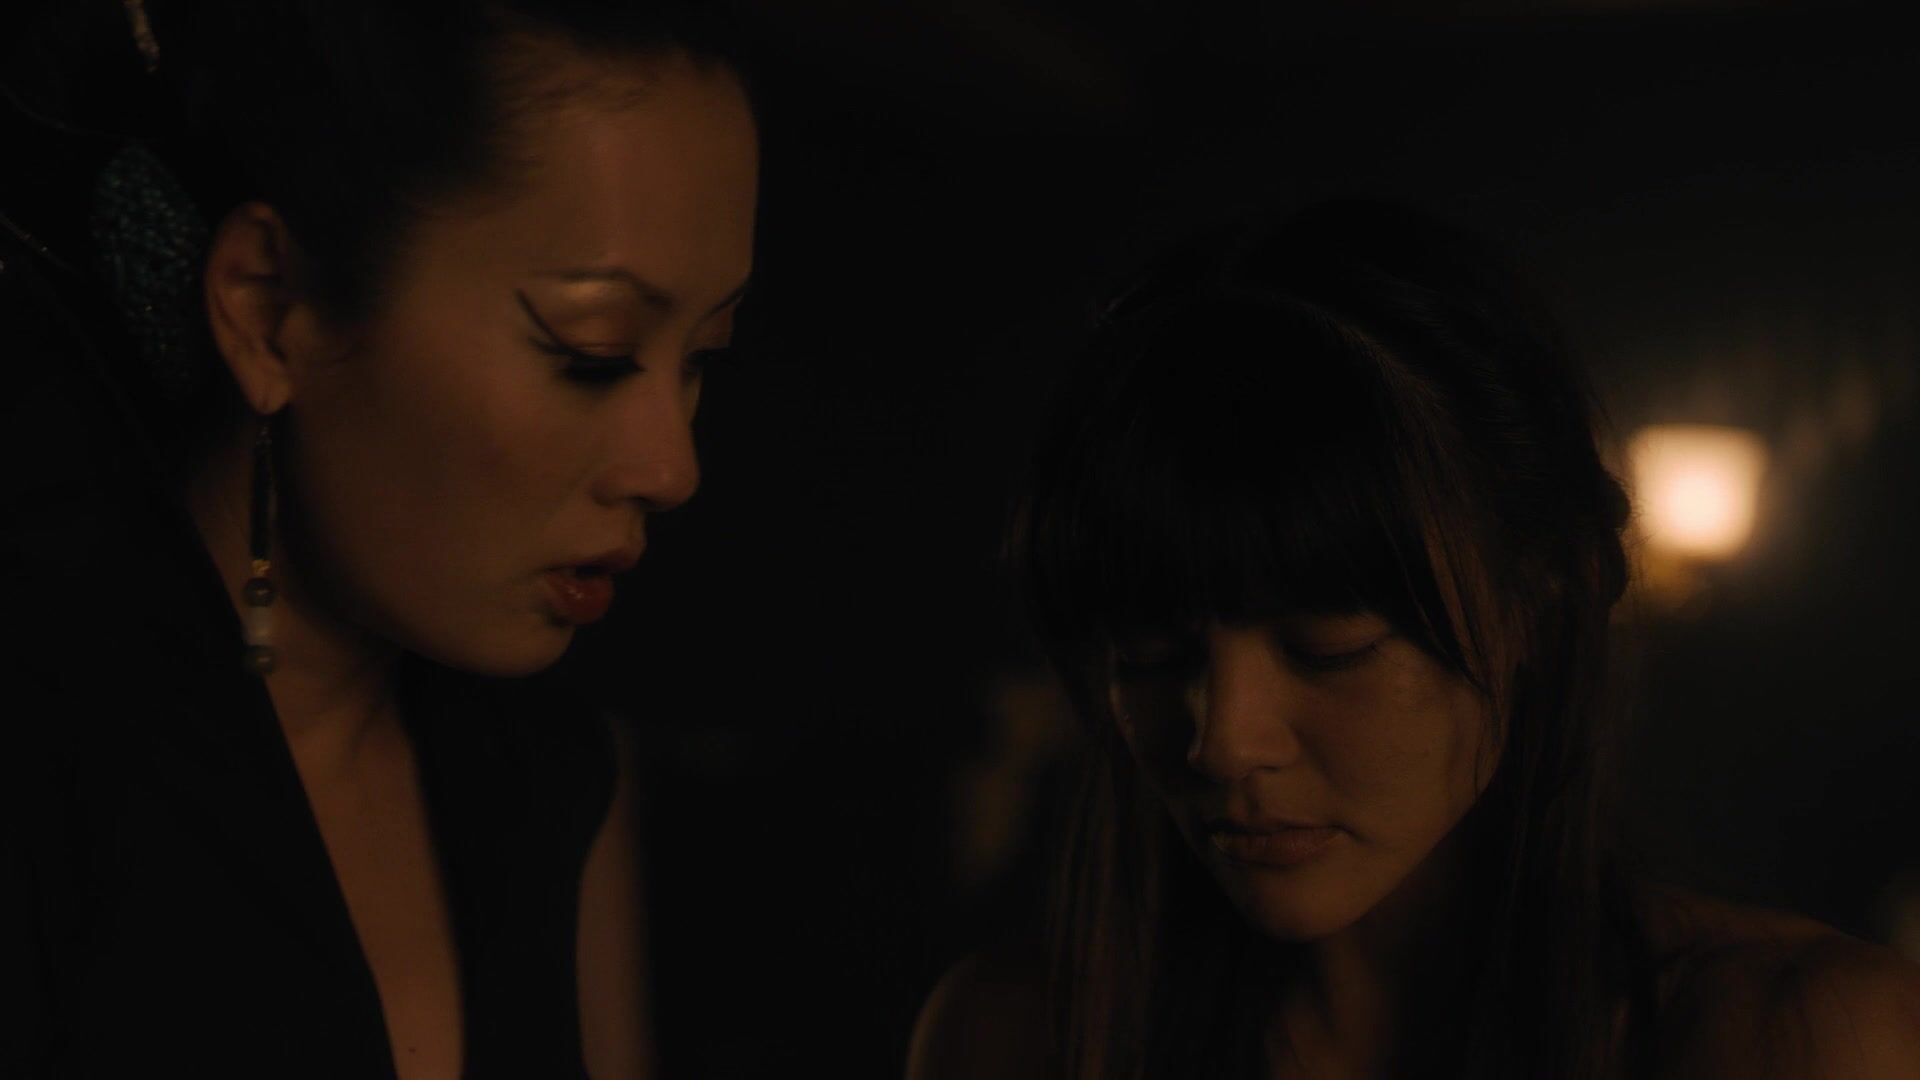 18Lesbianz Hanni Choi is sexy to look at in Warrior s01e07 (2019) Hustler - 1